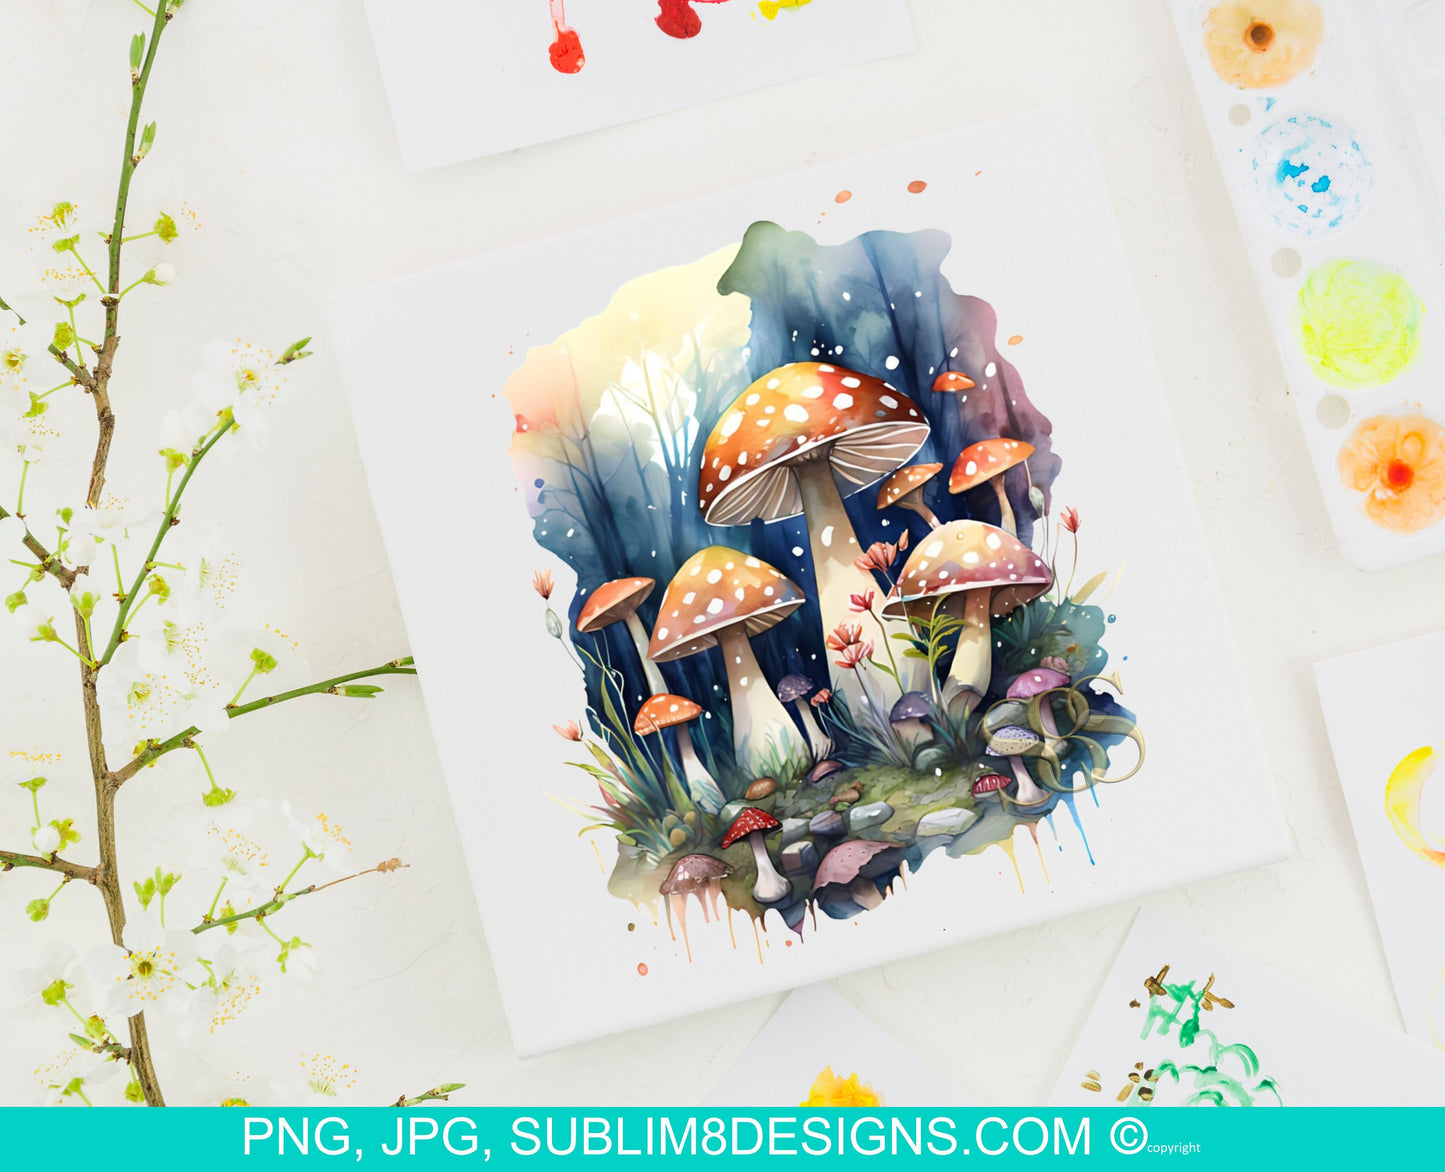 Mystical Mushrooms: A Watercolor Forest Adventure Sublimation Design PNG and JPG